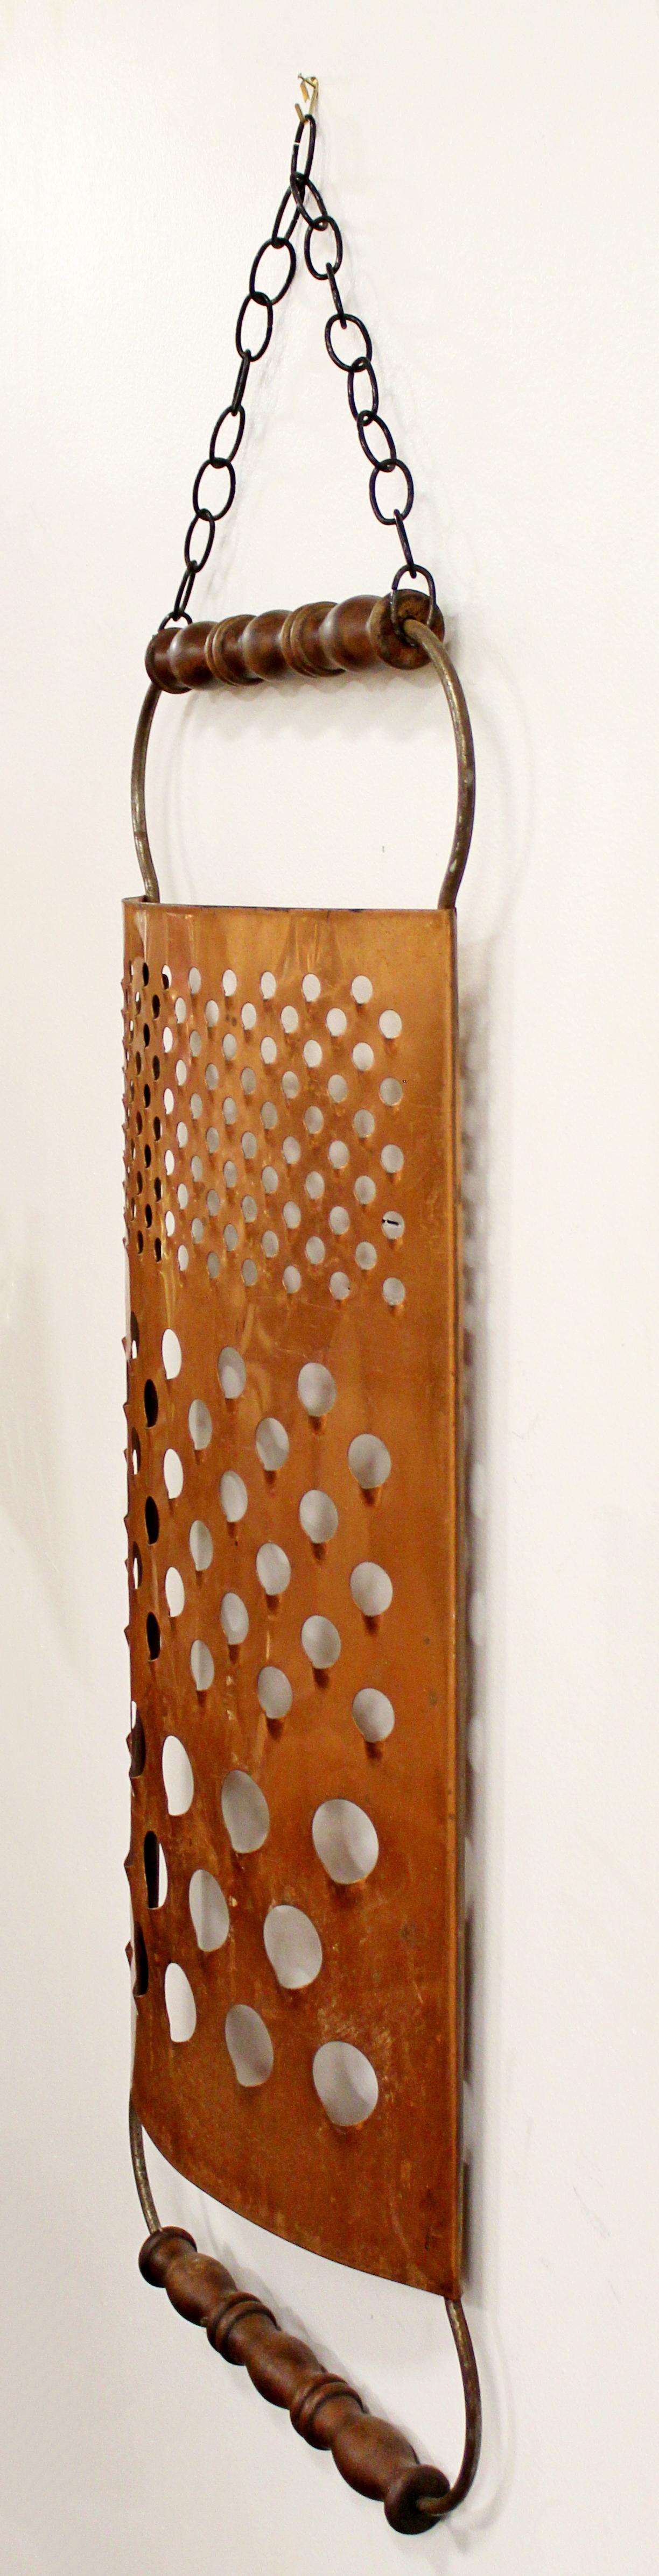 American Mid-Century Modern Curtis Jere Signed Copper Cheese Grater Wall Sculpture, 1970s